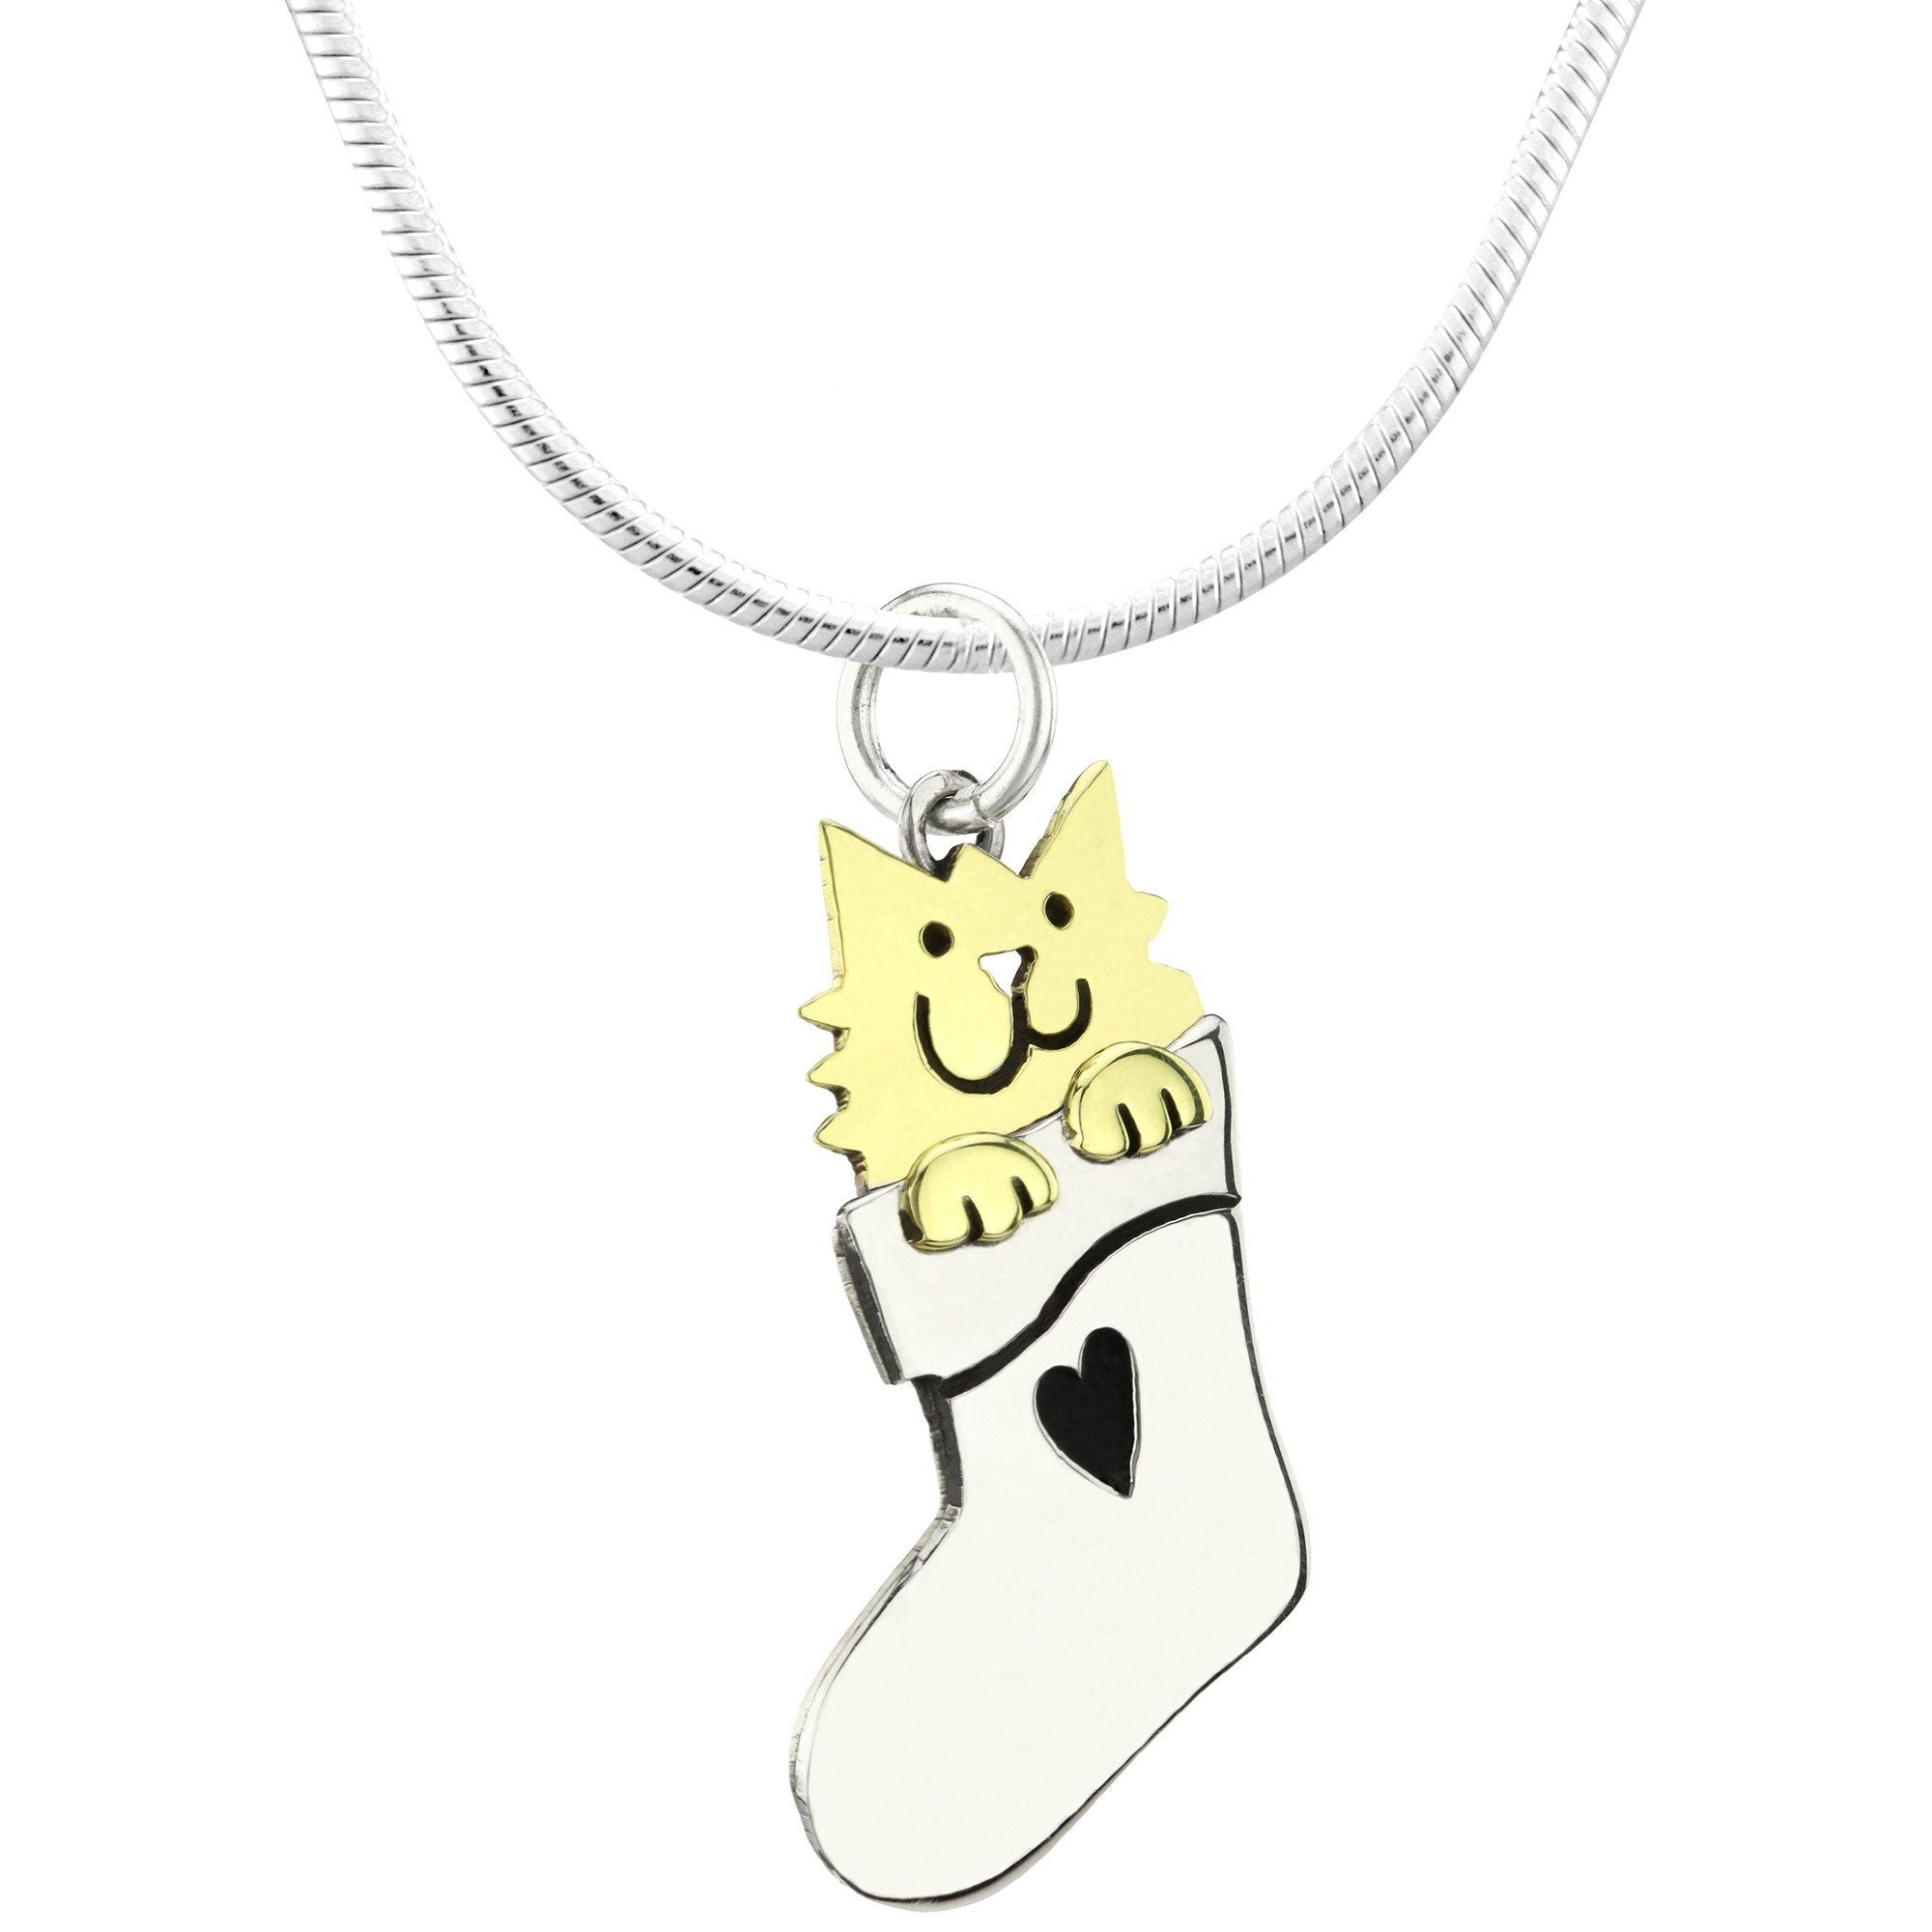 Sweet Stocking Kitty Sterling Necklace - With Sterling Cable Chain